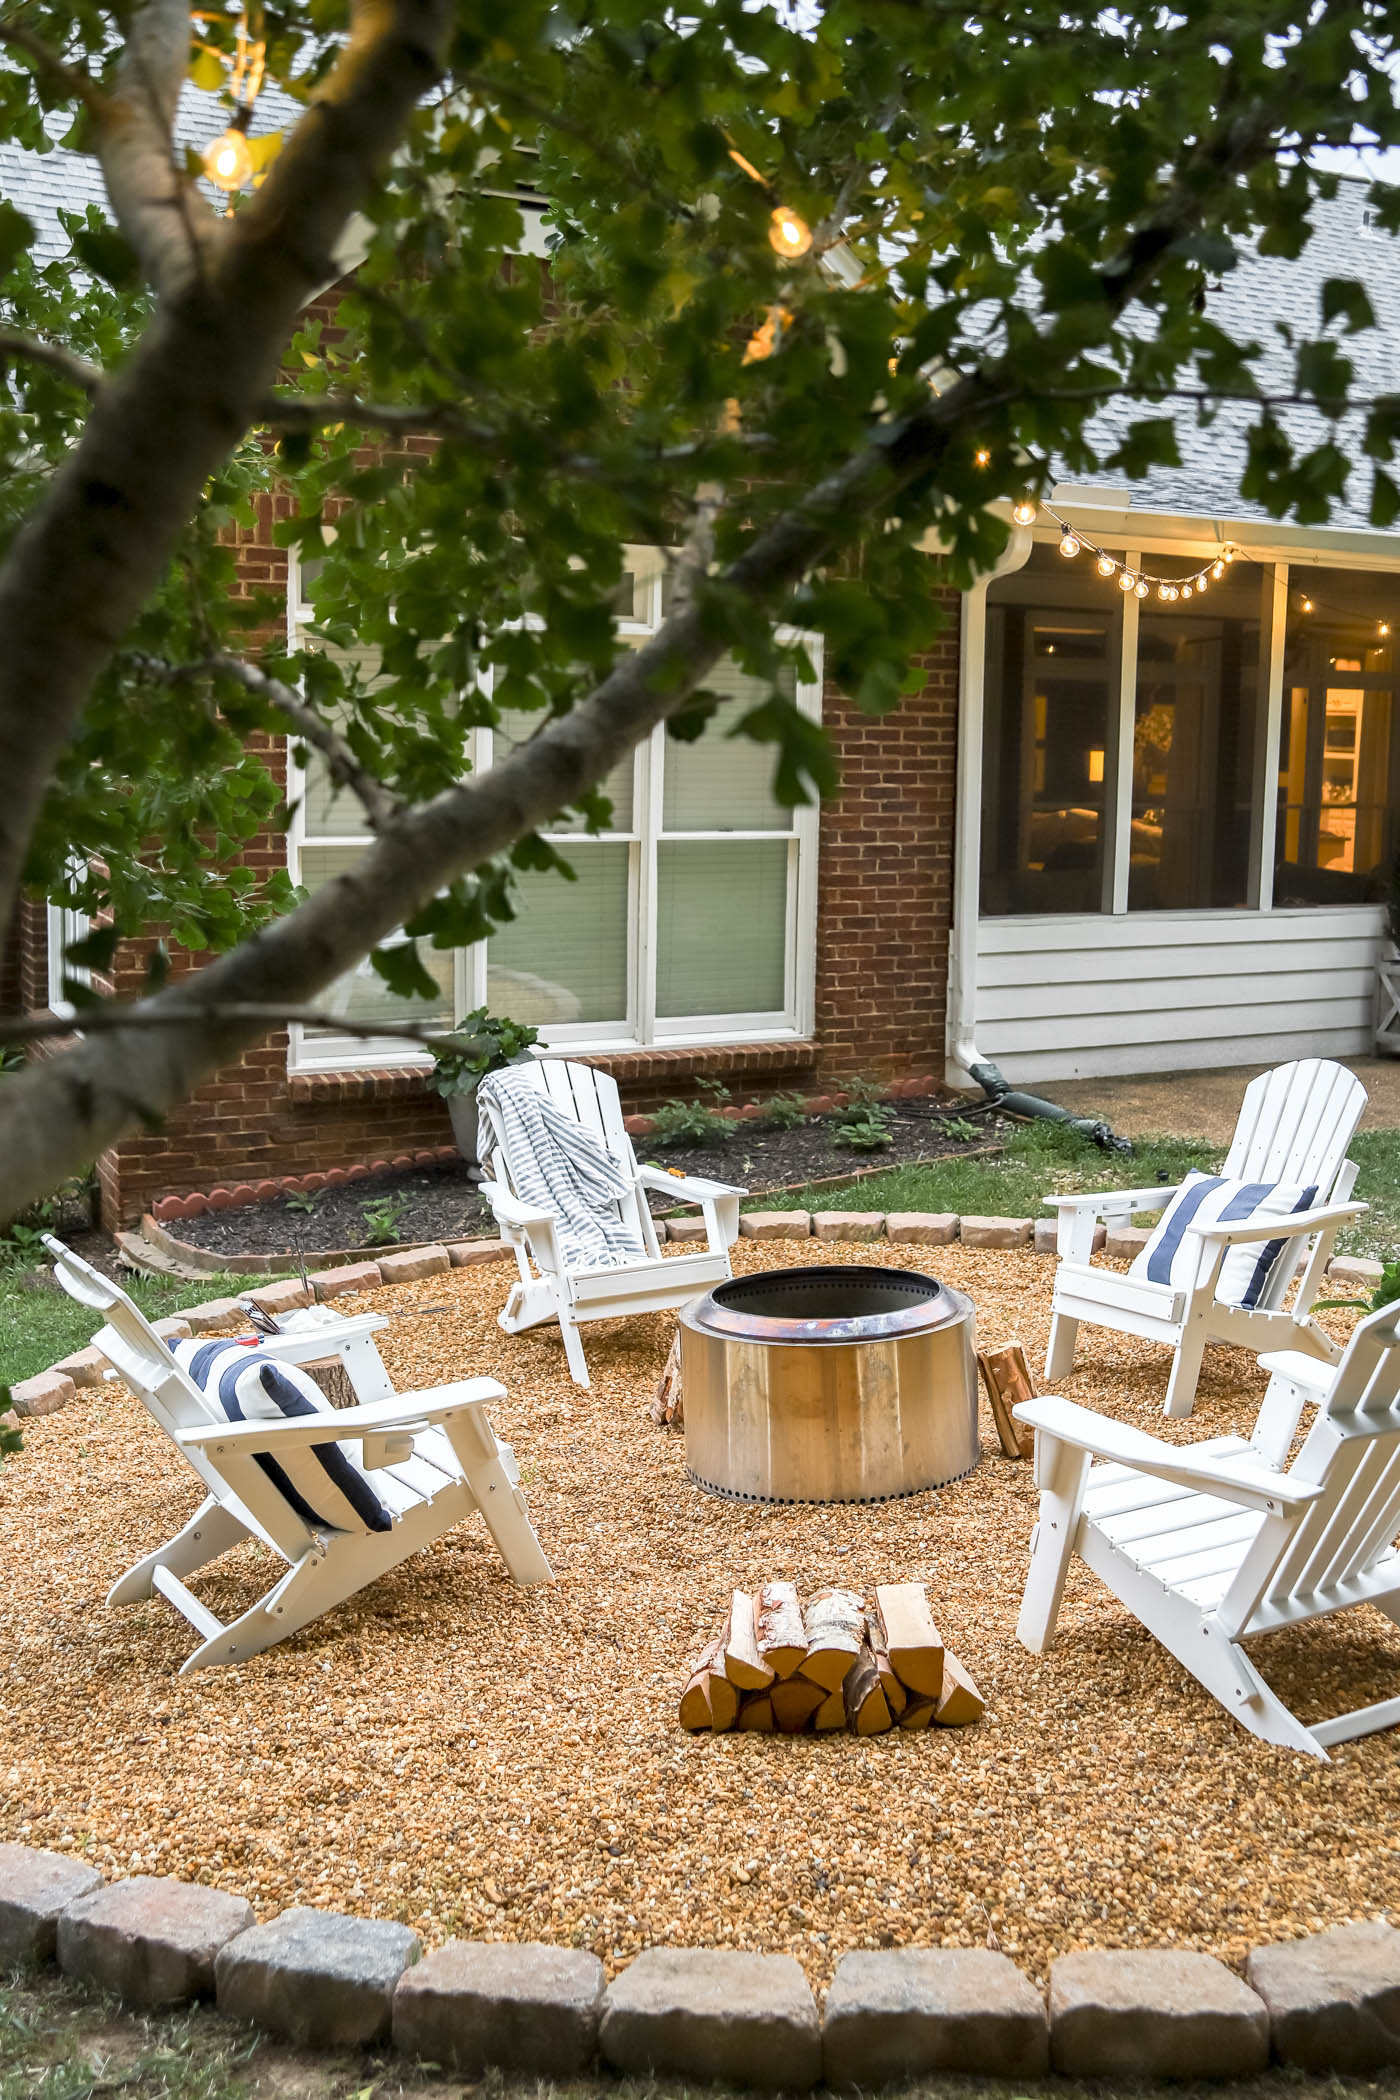 Fire pit area with white adirondack chairs, pea gravel and Yukon Solo Stove.